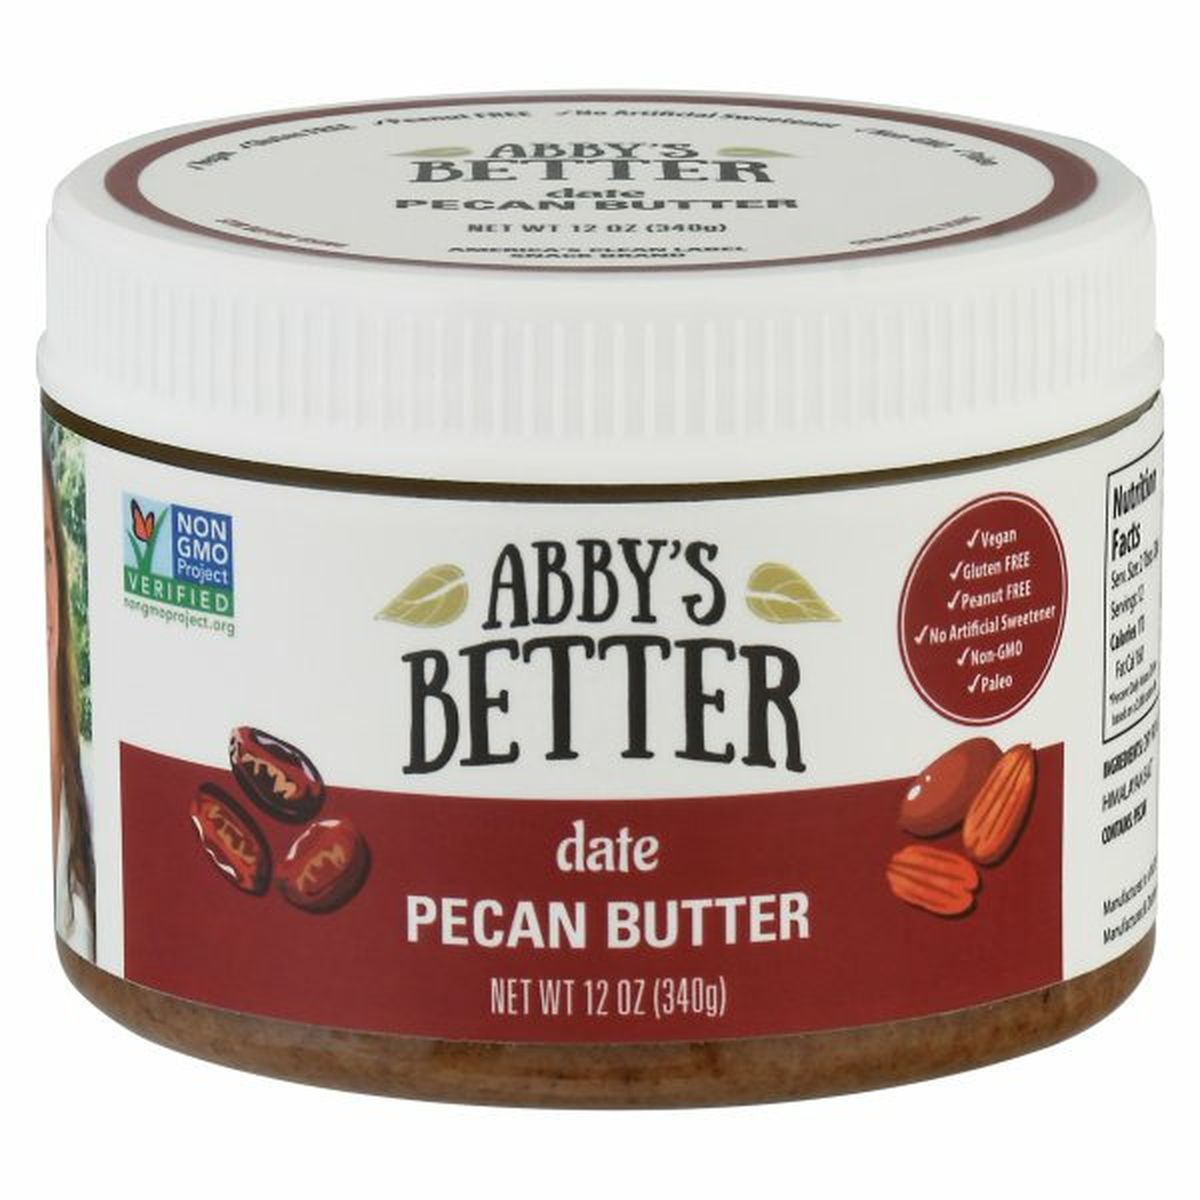 Calories in Abby's Better Pecan Butter, Date